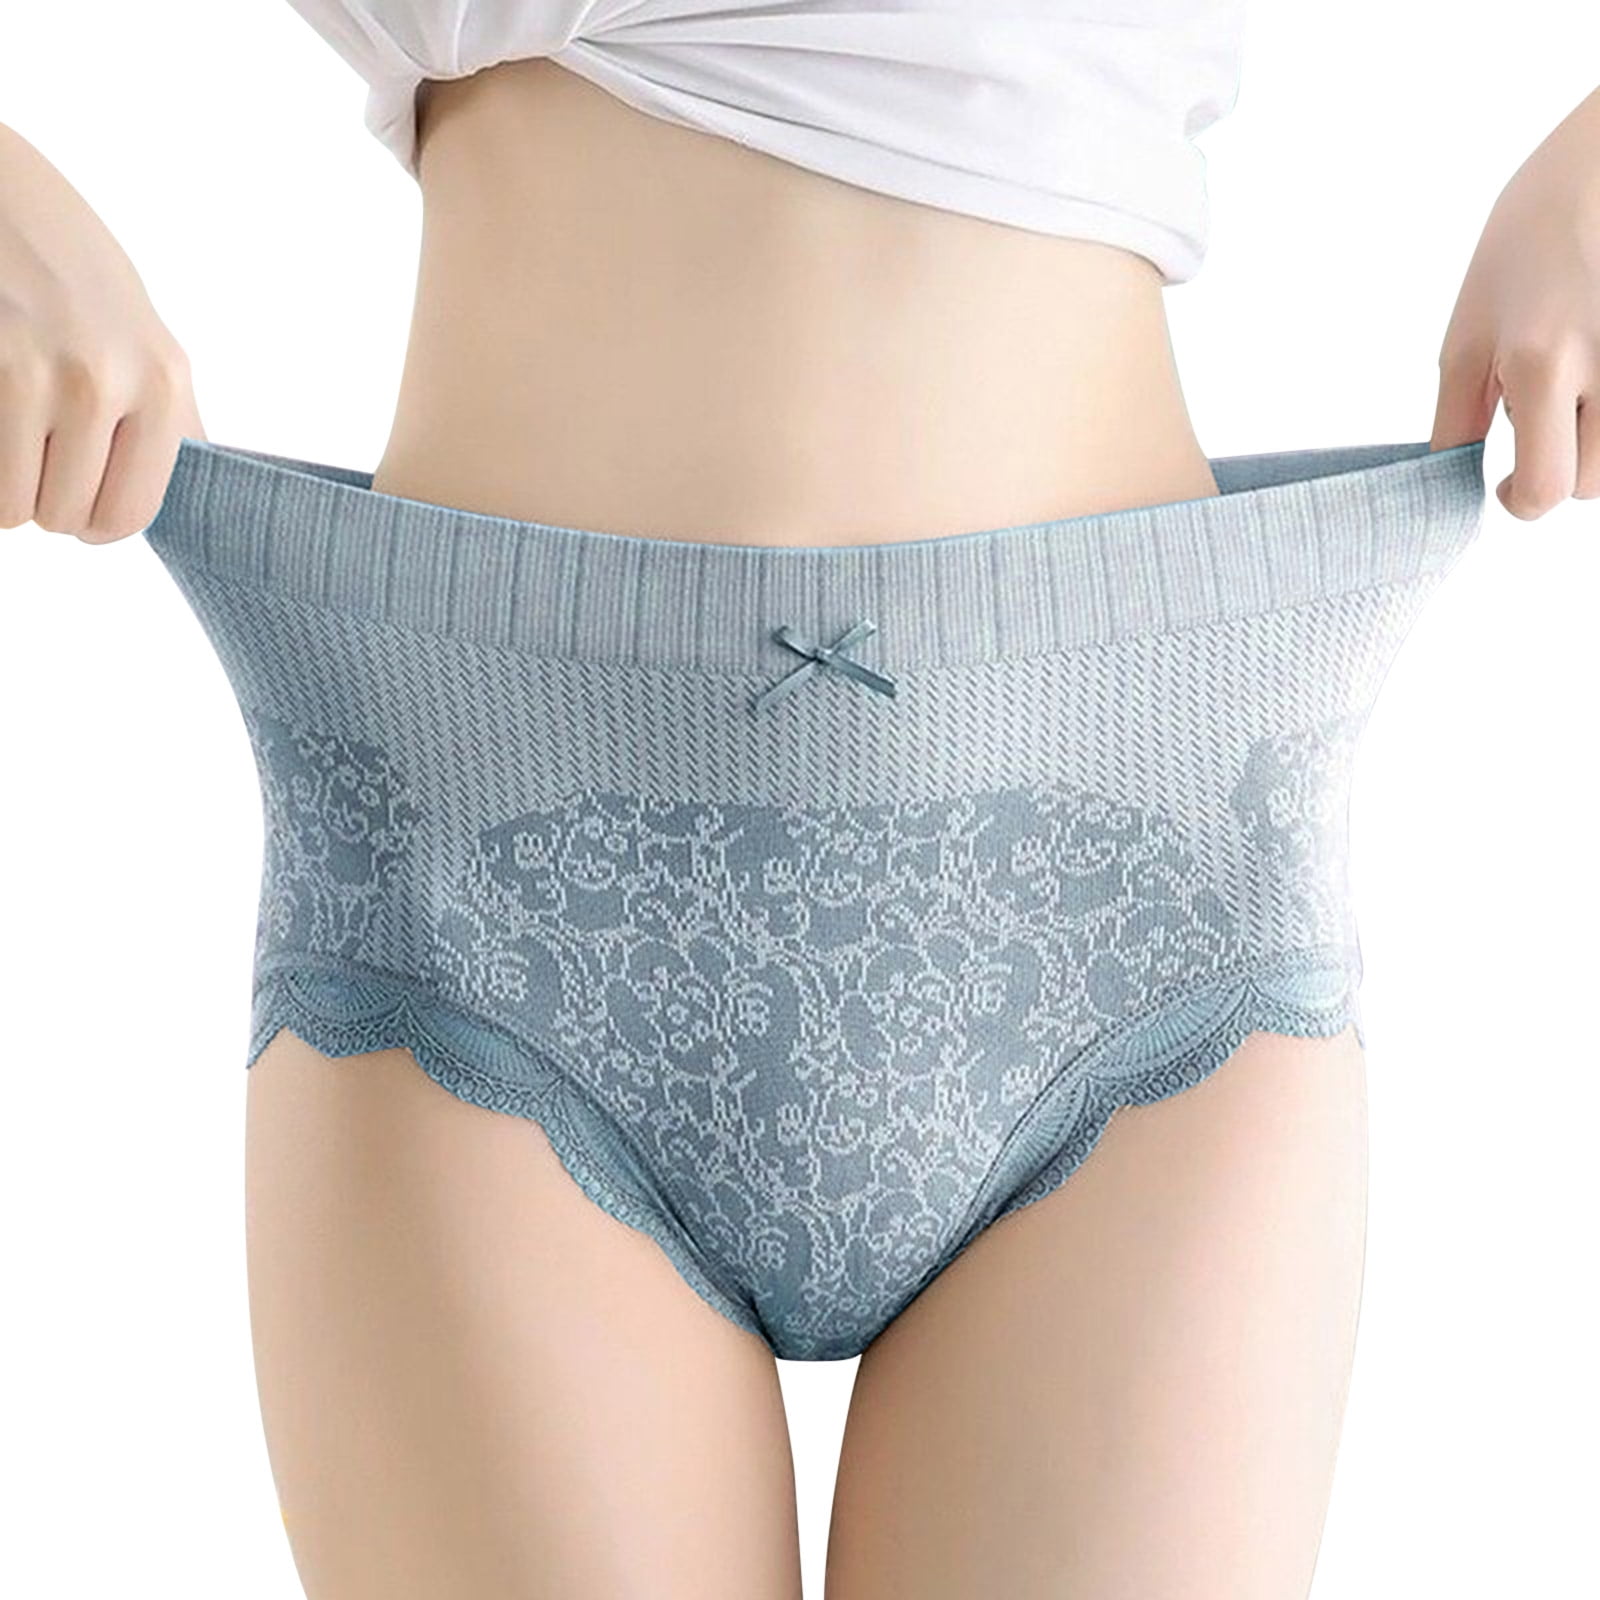 PMUYBHF Cotton Underwear For Women Plus Size 6X Women'S High Waist Lace  Panties With Lifter Comfortable And Stylish Underwear For A Flattering  Silhouette Seamless Underwear For Women Xxl 6.99 